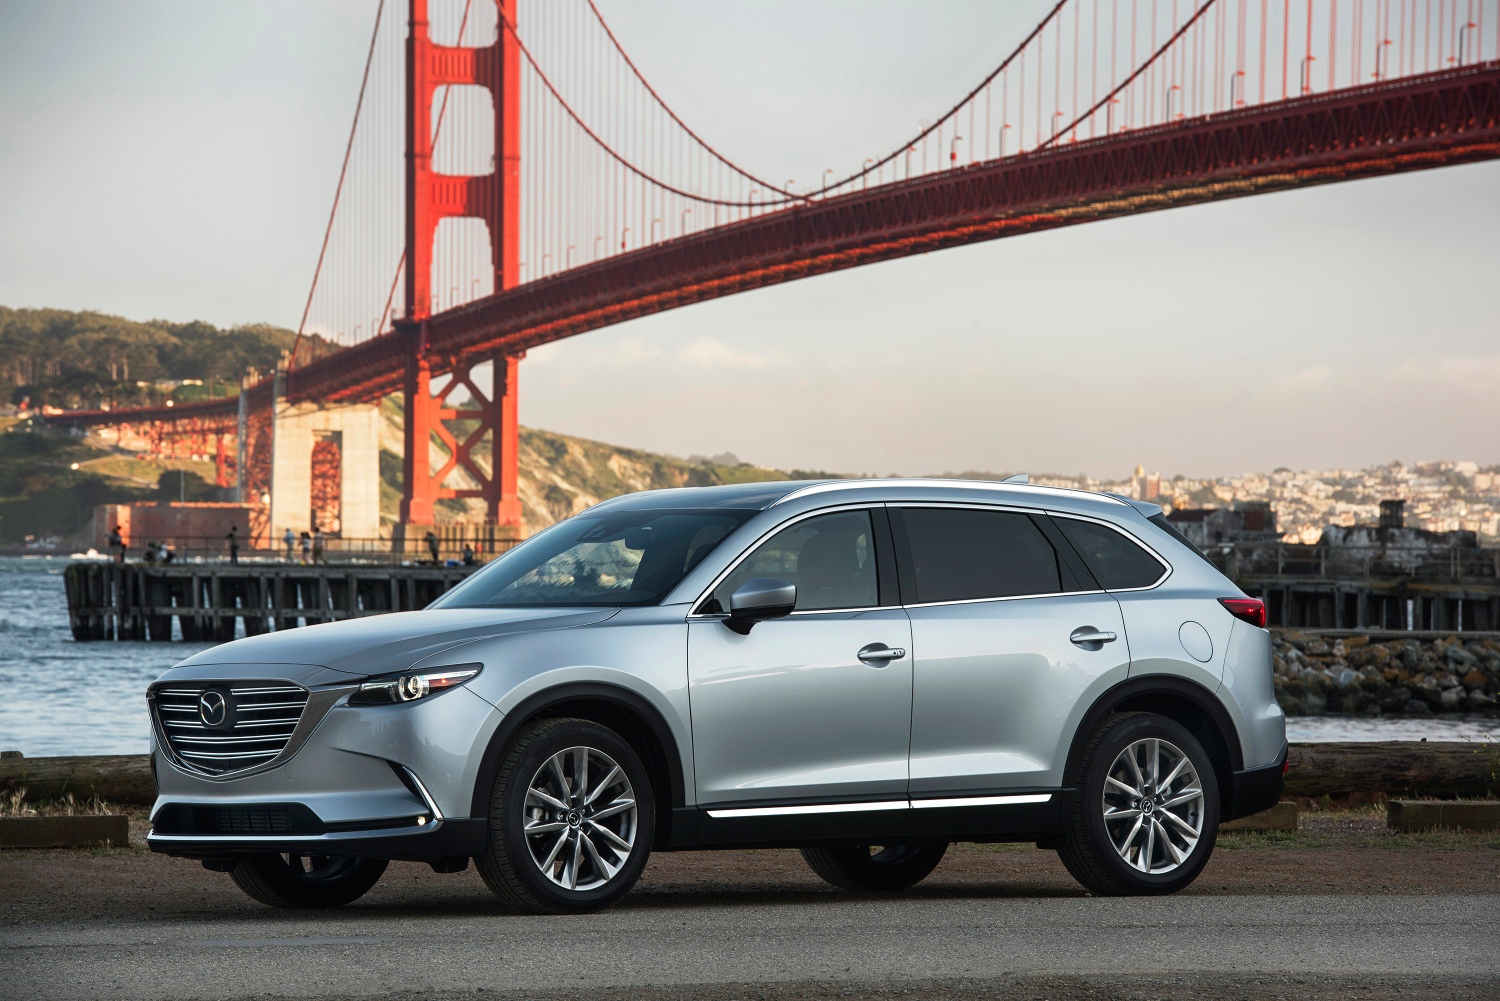 The best SUVs to buy used in 2022 like this Mazda CX-9